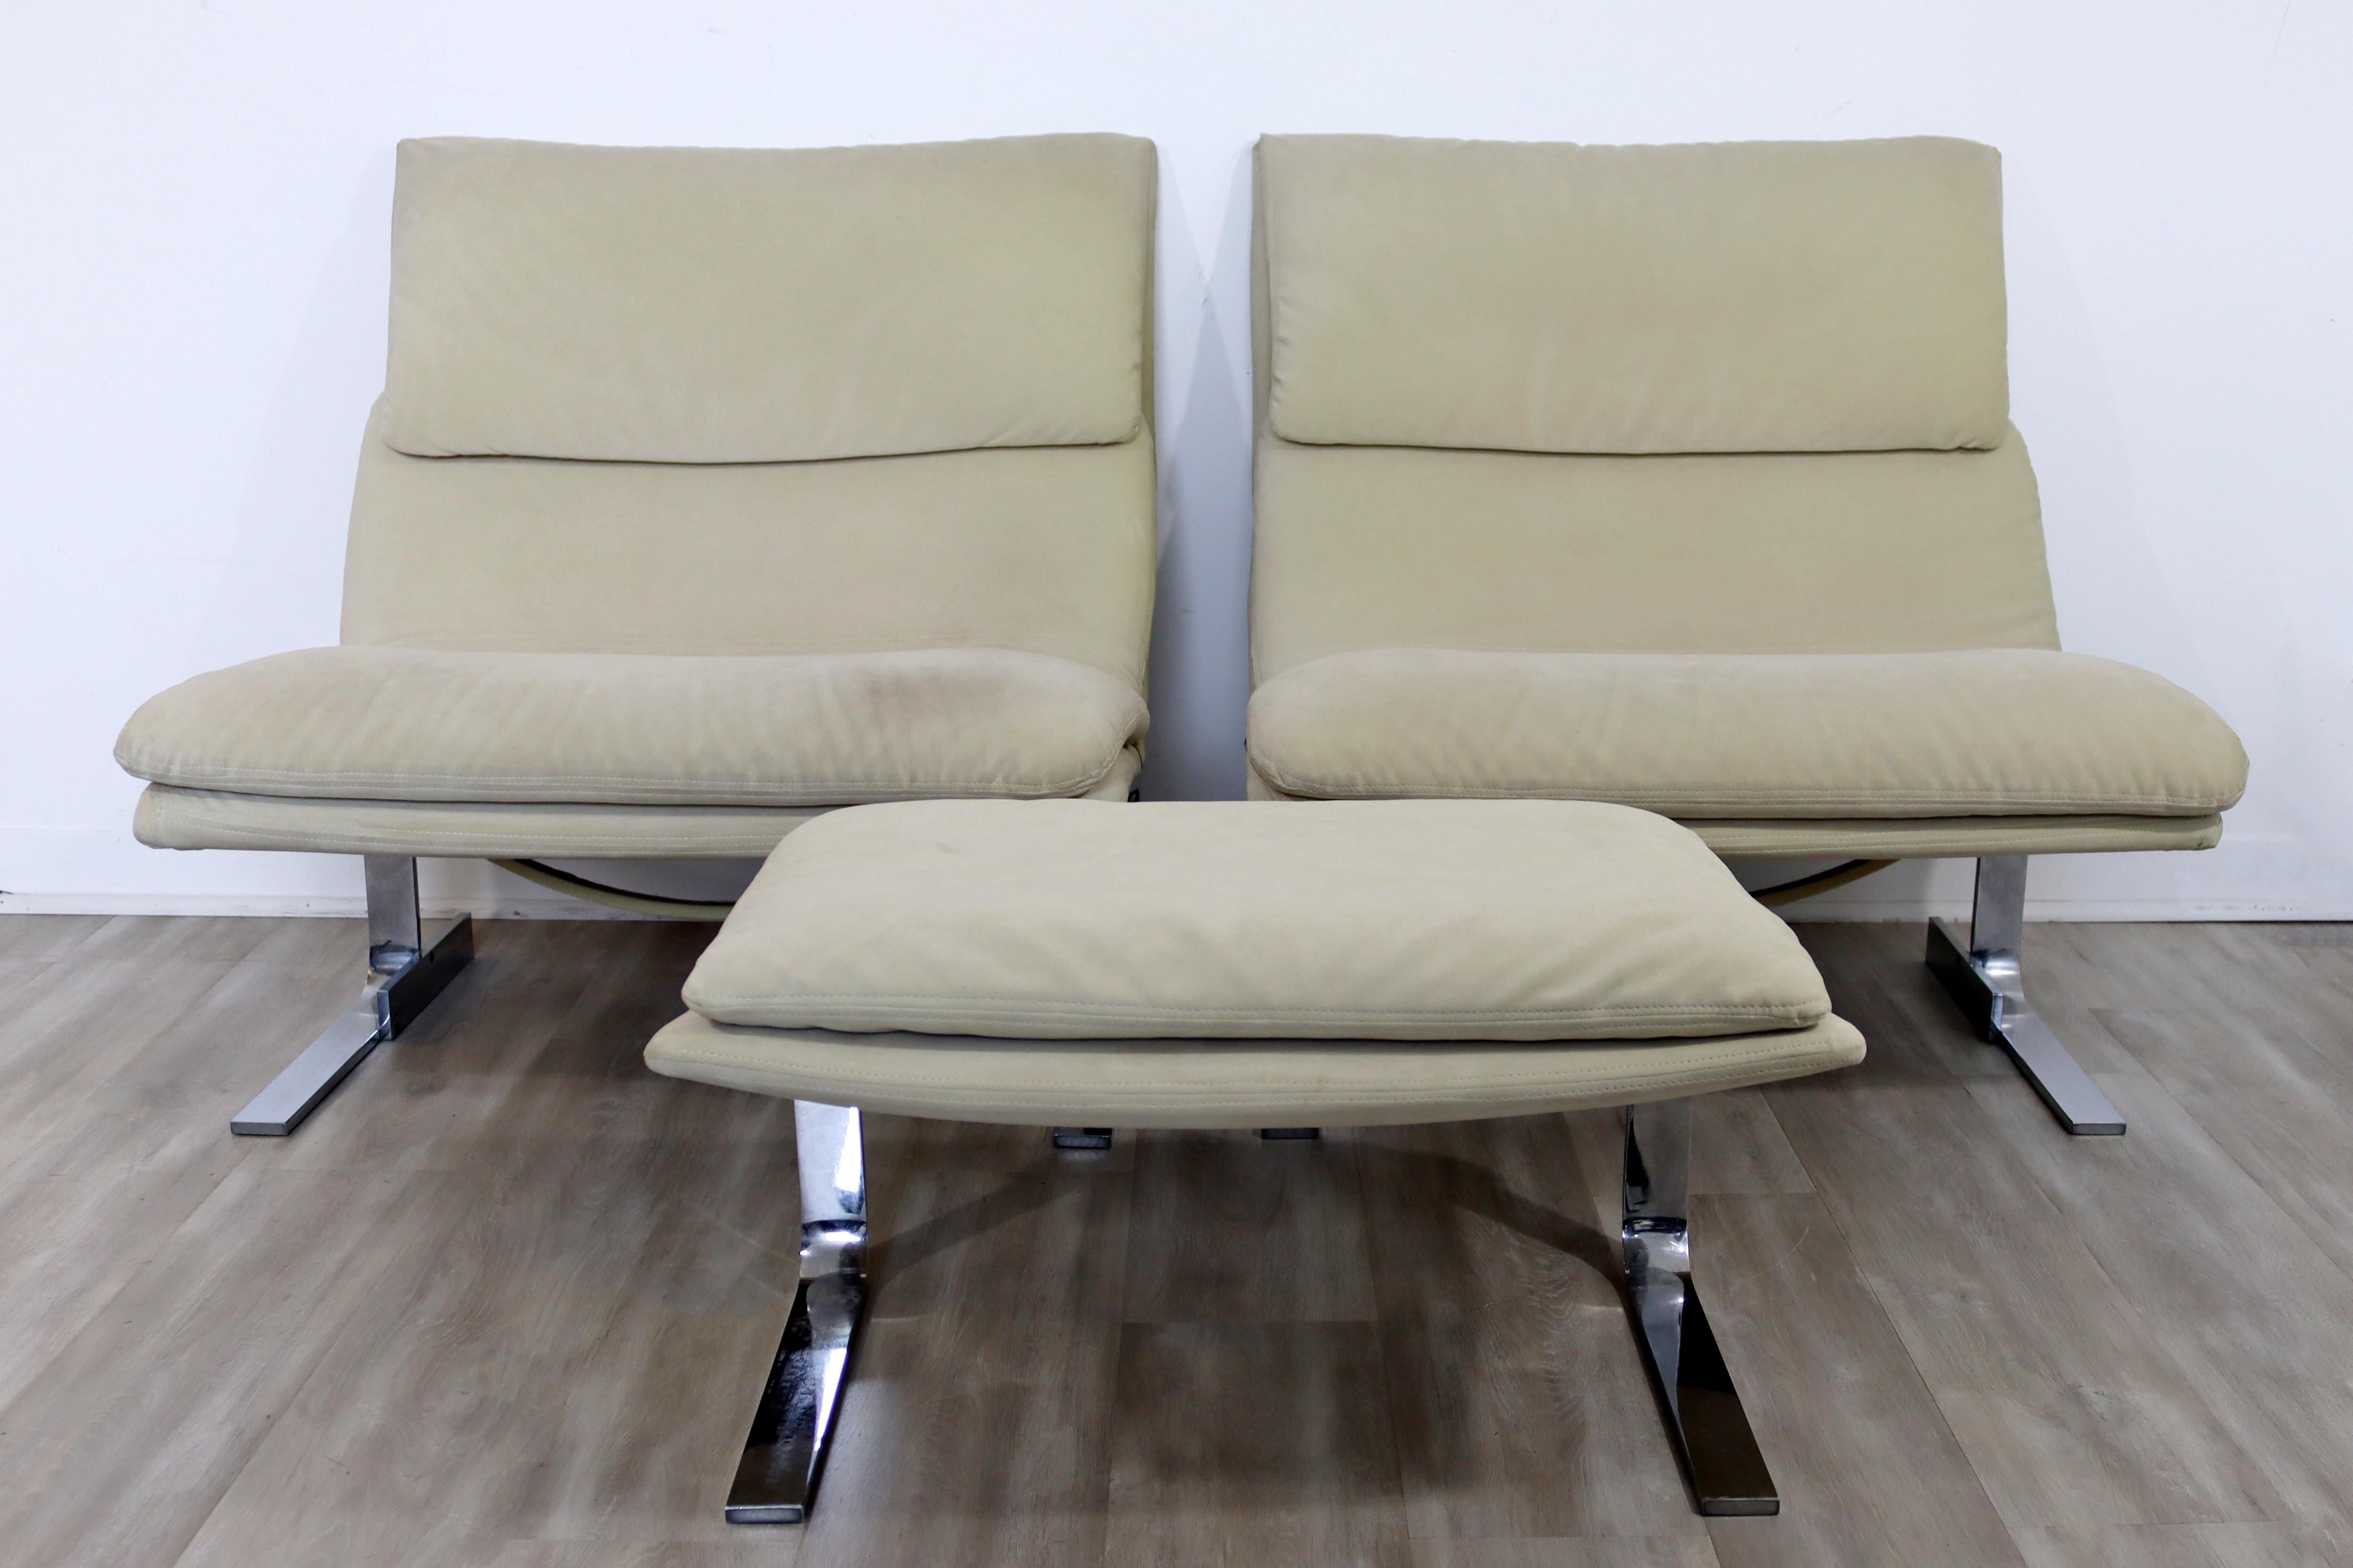 For your consideration is a splendid pair of Onda Wave lounge chairs and matching ottoman, on chrome bases, by Giovani Offredi for Saporiti, circa the 1970s. In very good vintage condition. The dimensions of the lounge chairs are 31